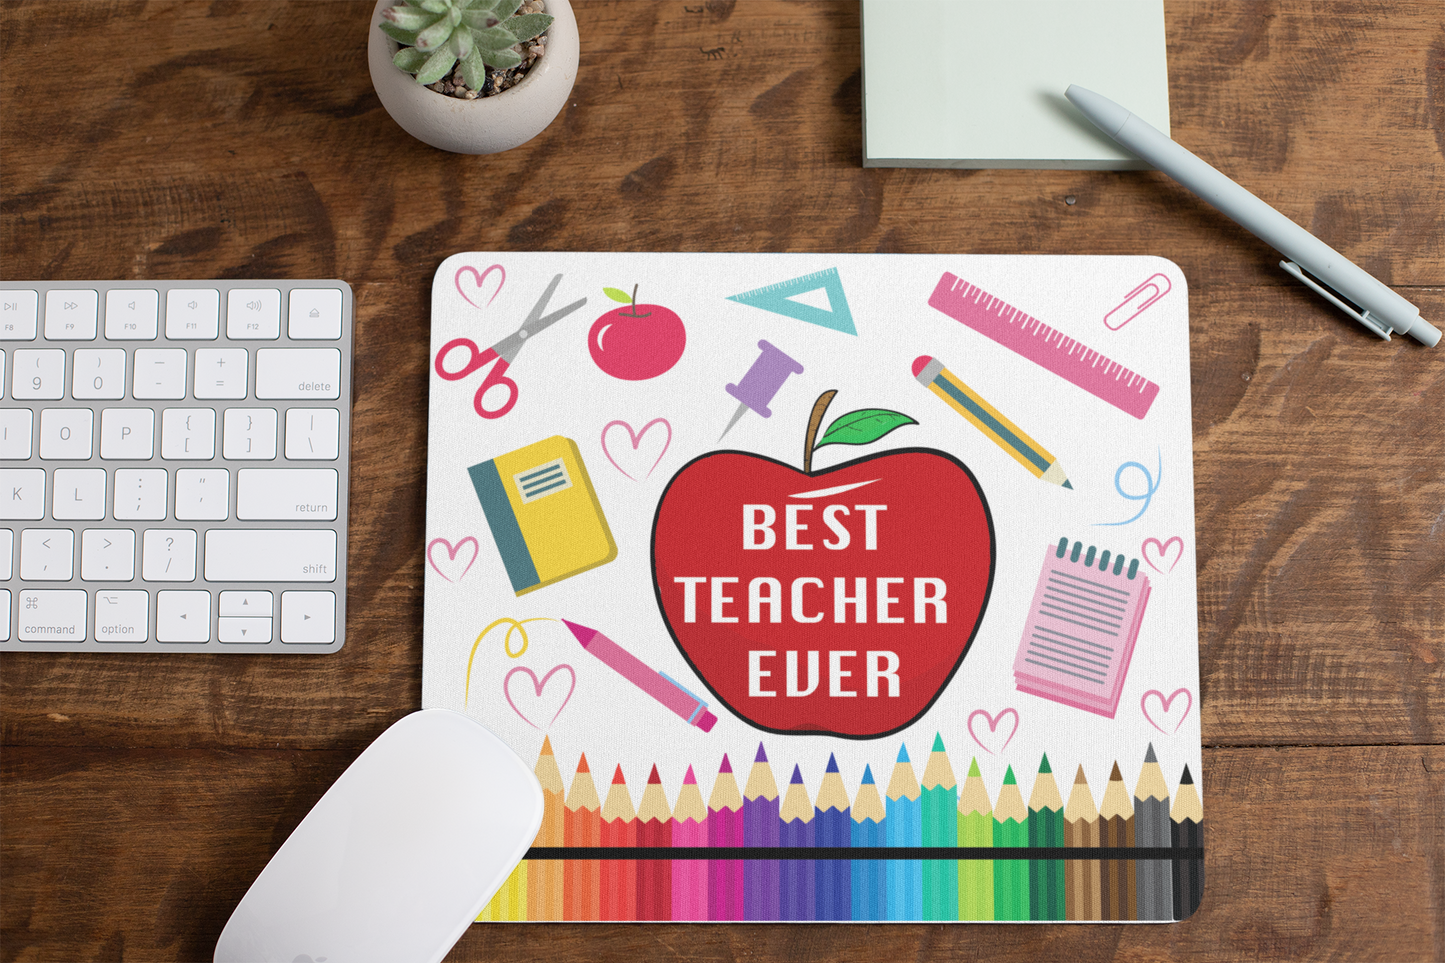 Best Teacher Ever Mousepad For Office | Gaming | School. Mousepad for Laptop and Desktop